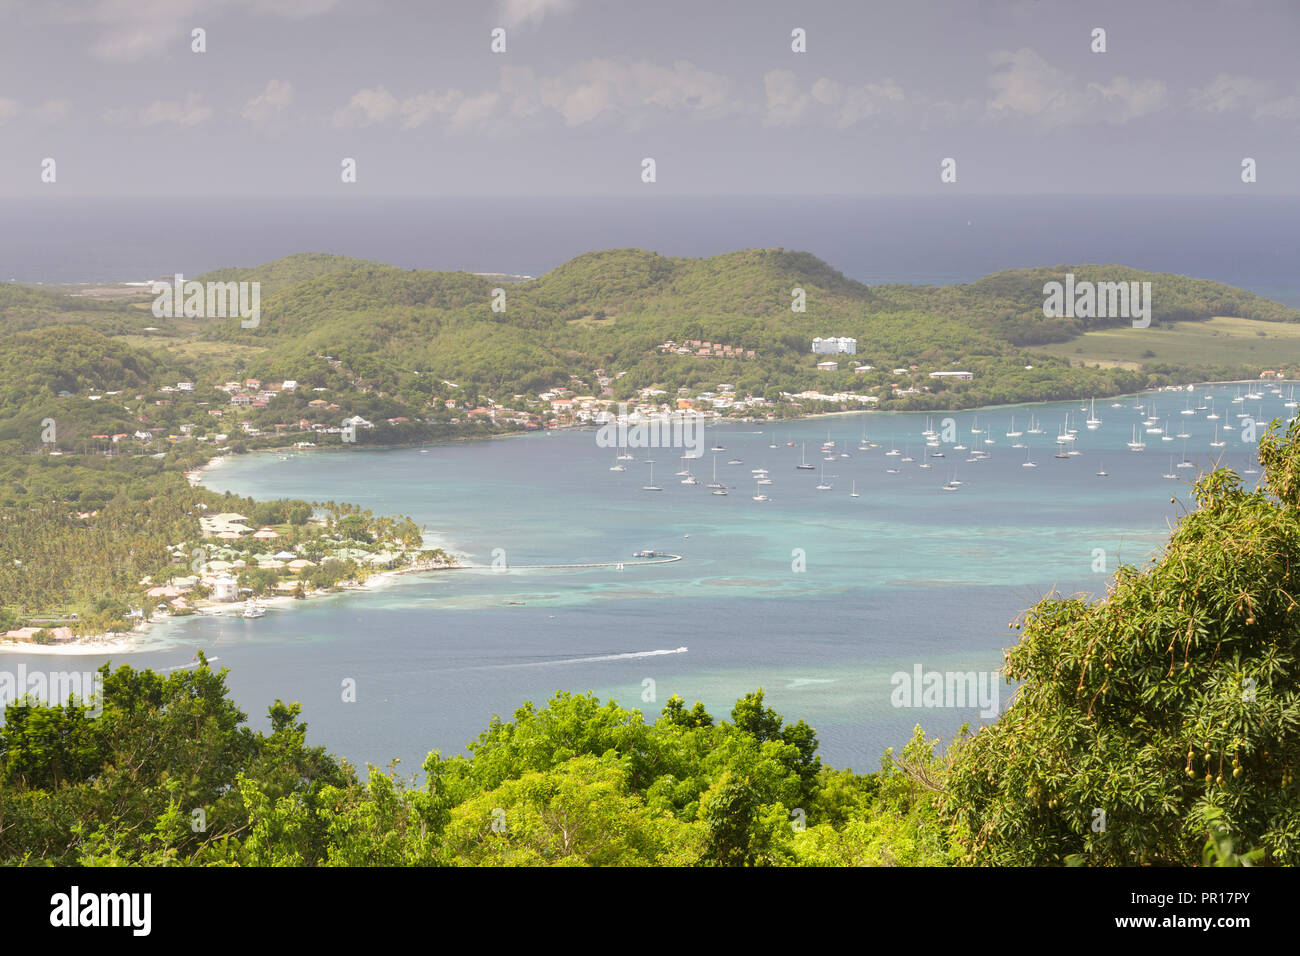 The tropical island paradise of Martinique, West Indies, Caribbean, Central America Stock Photo